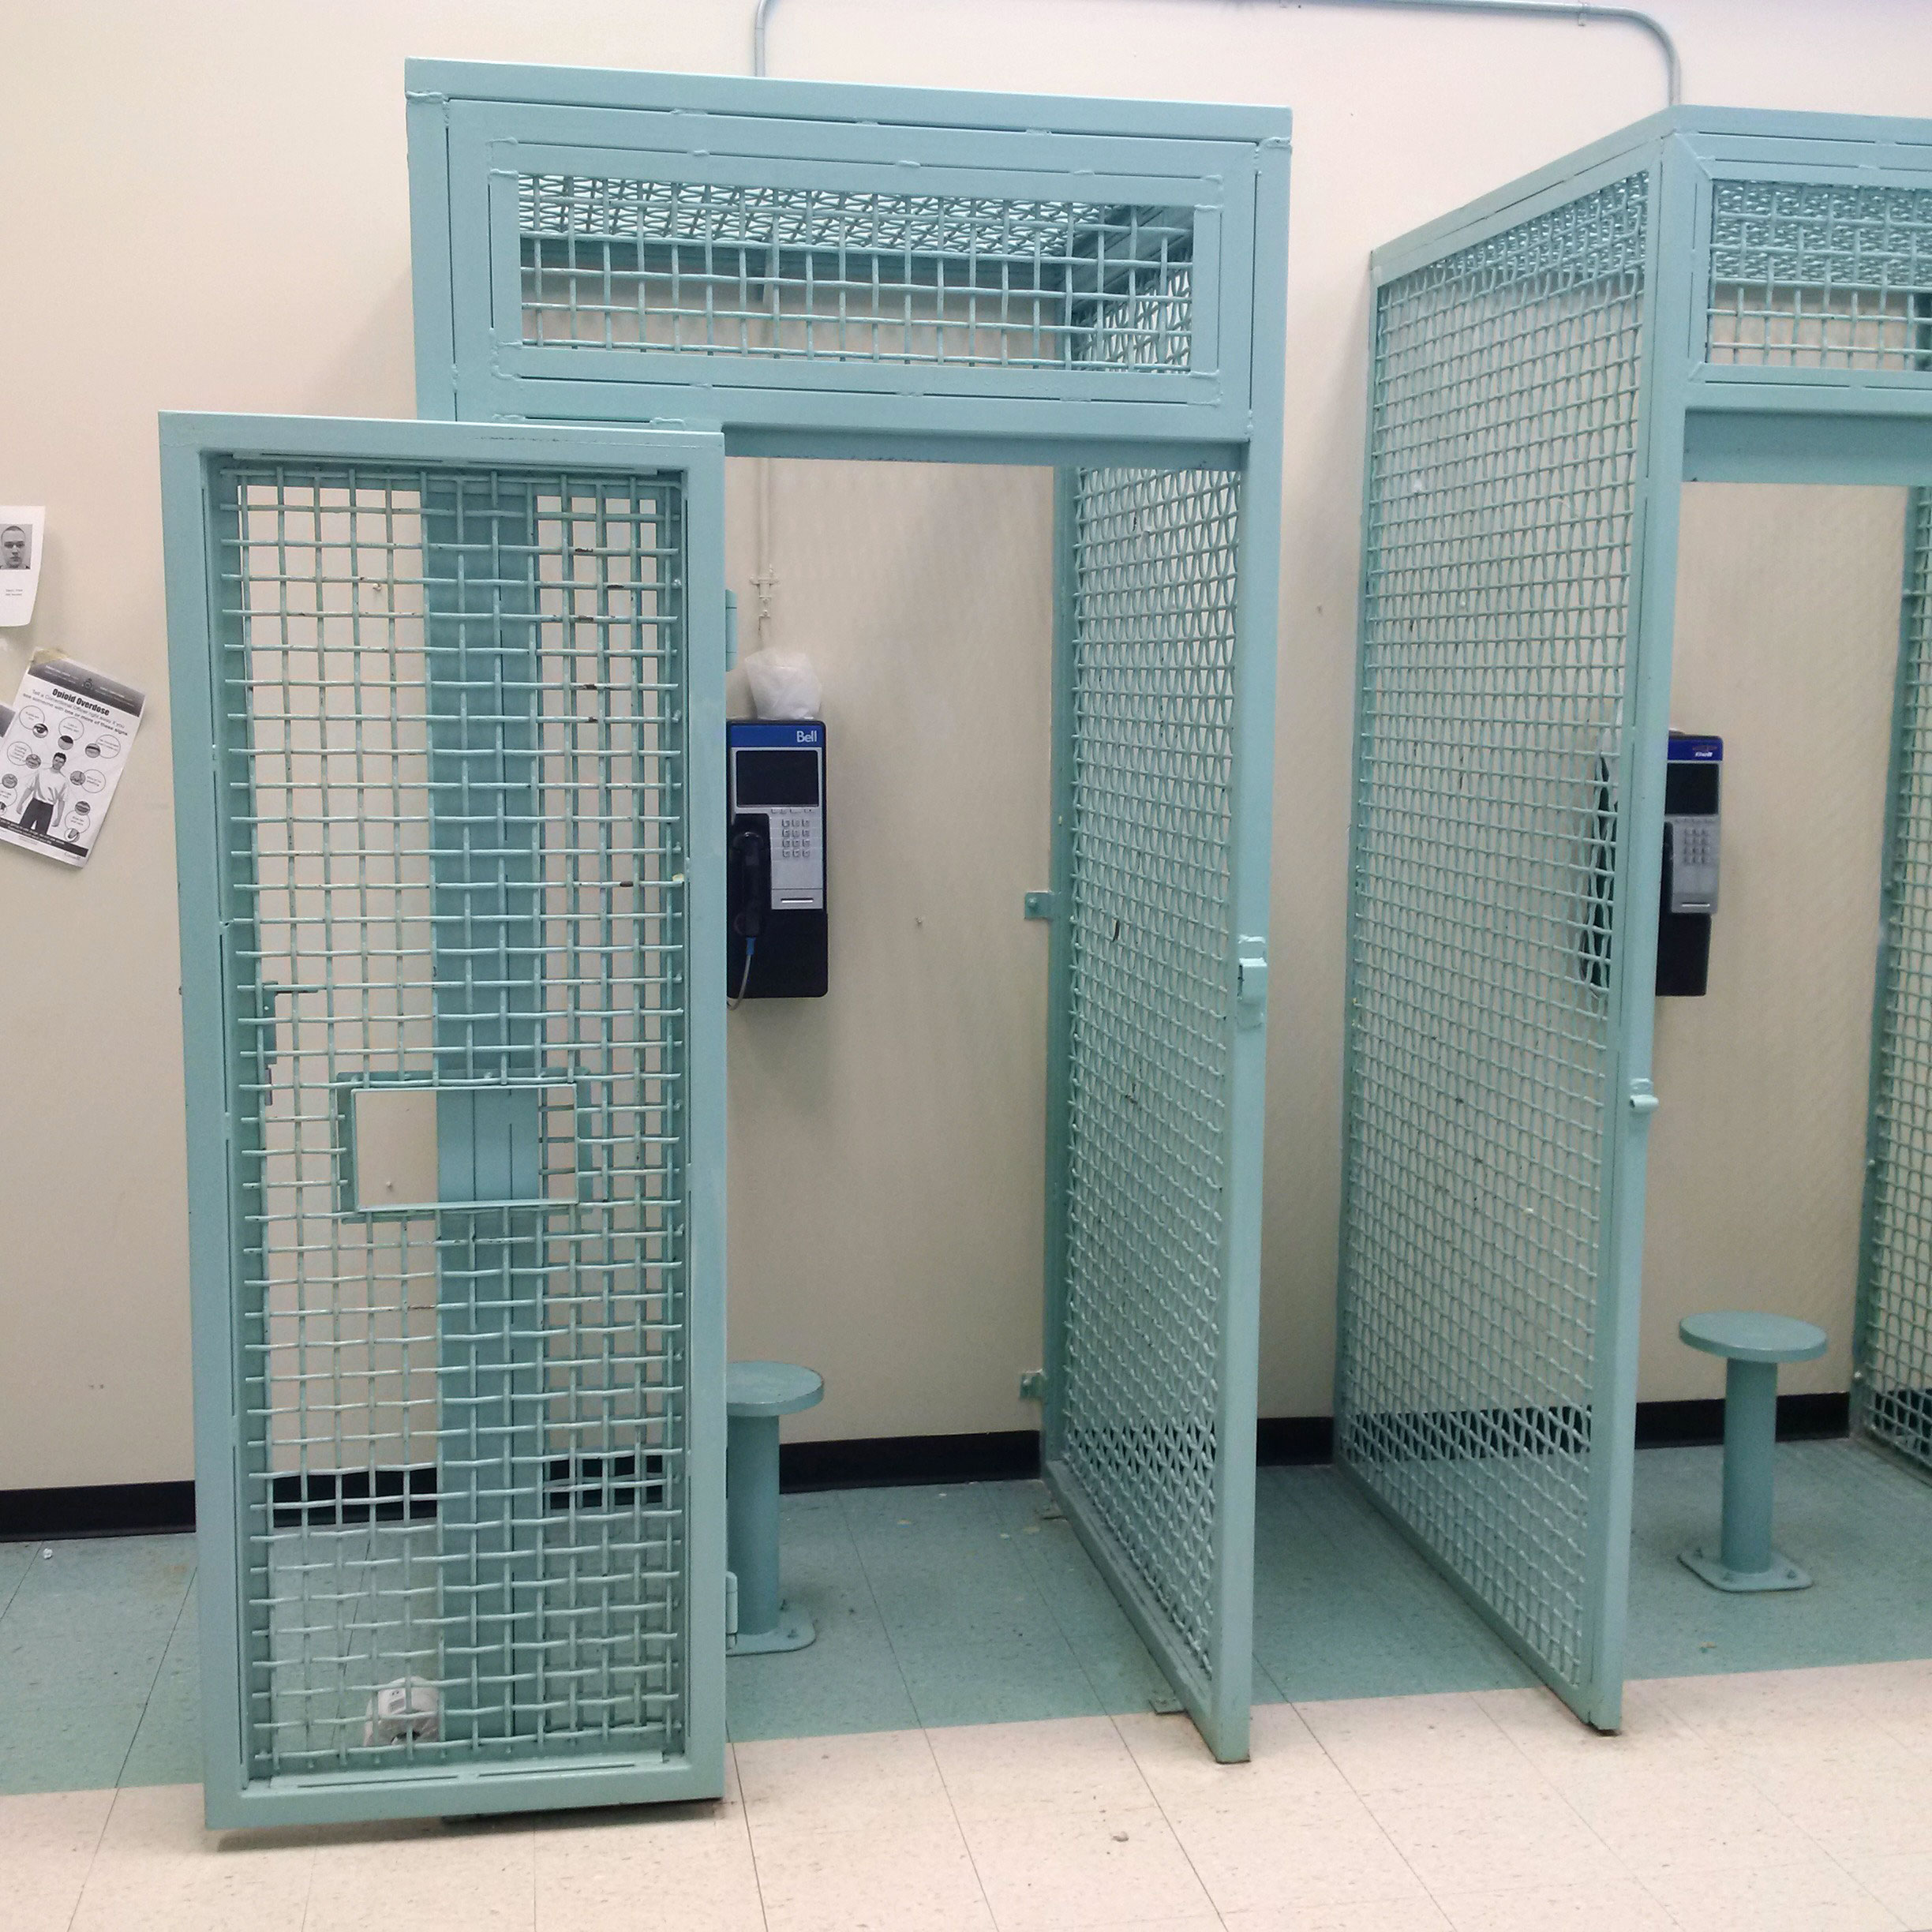 Prison pay phones at Stony Mountain Institution, a federal multi-security facility in Manitoba, Canada